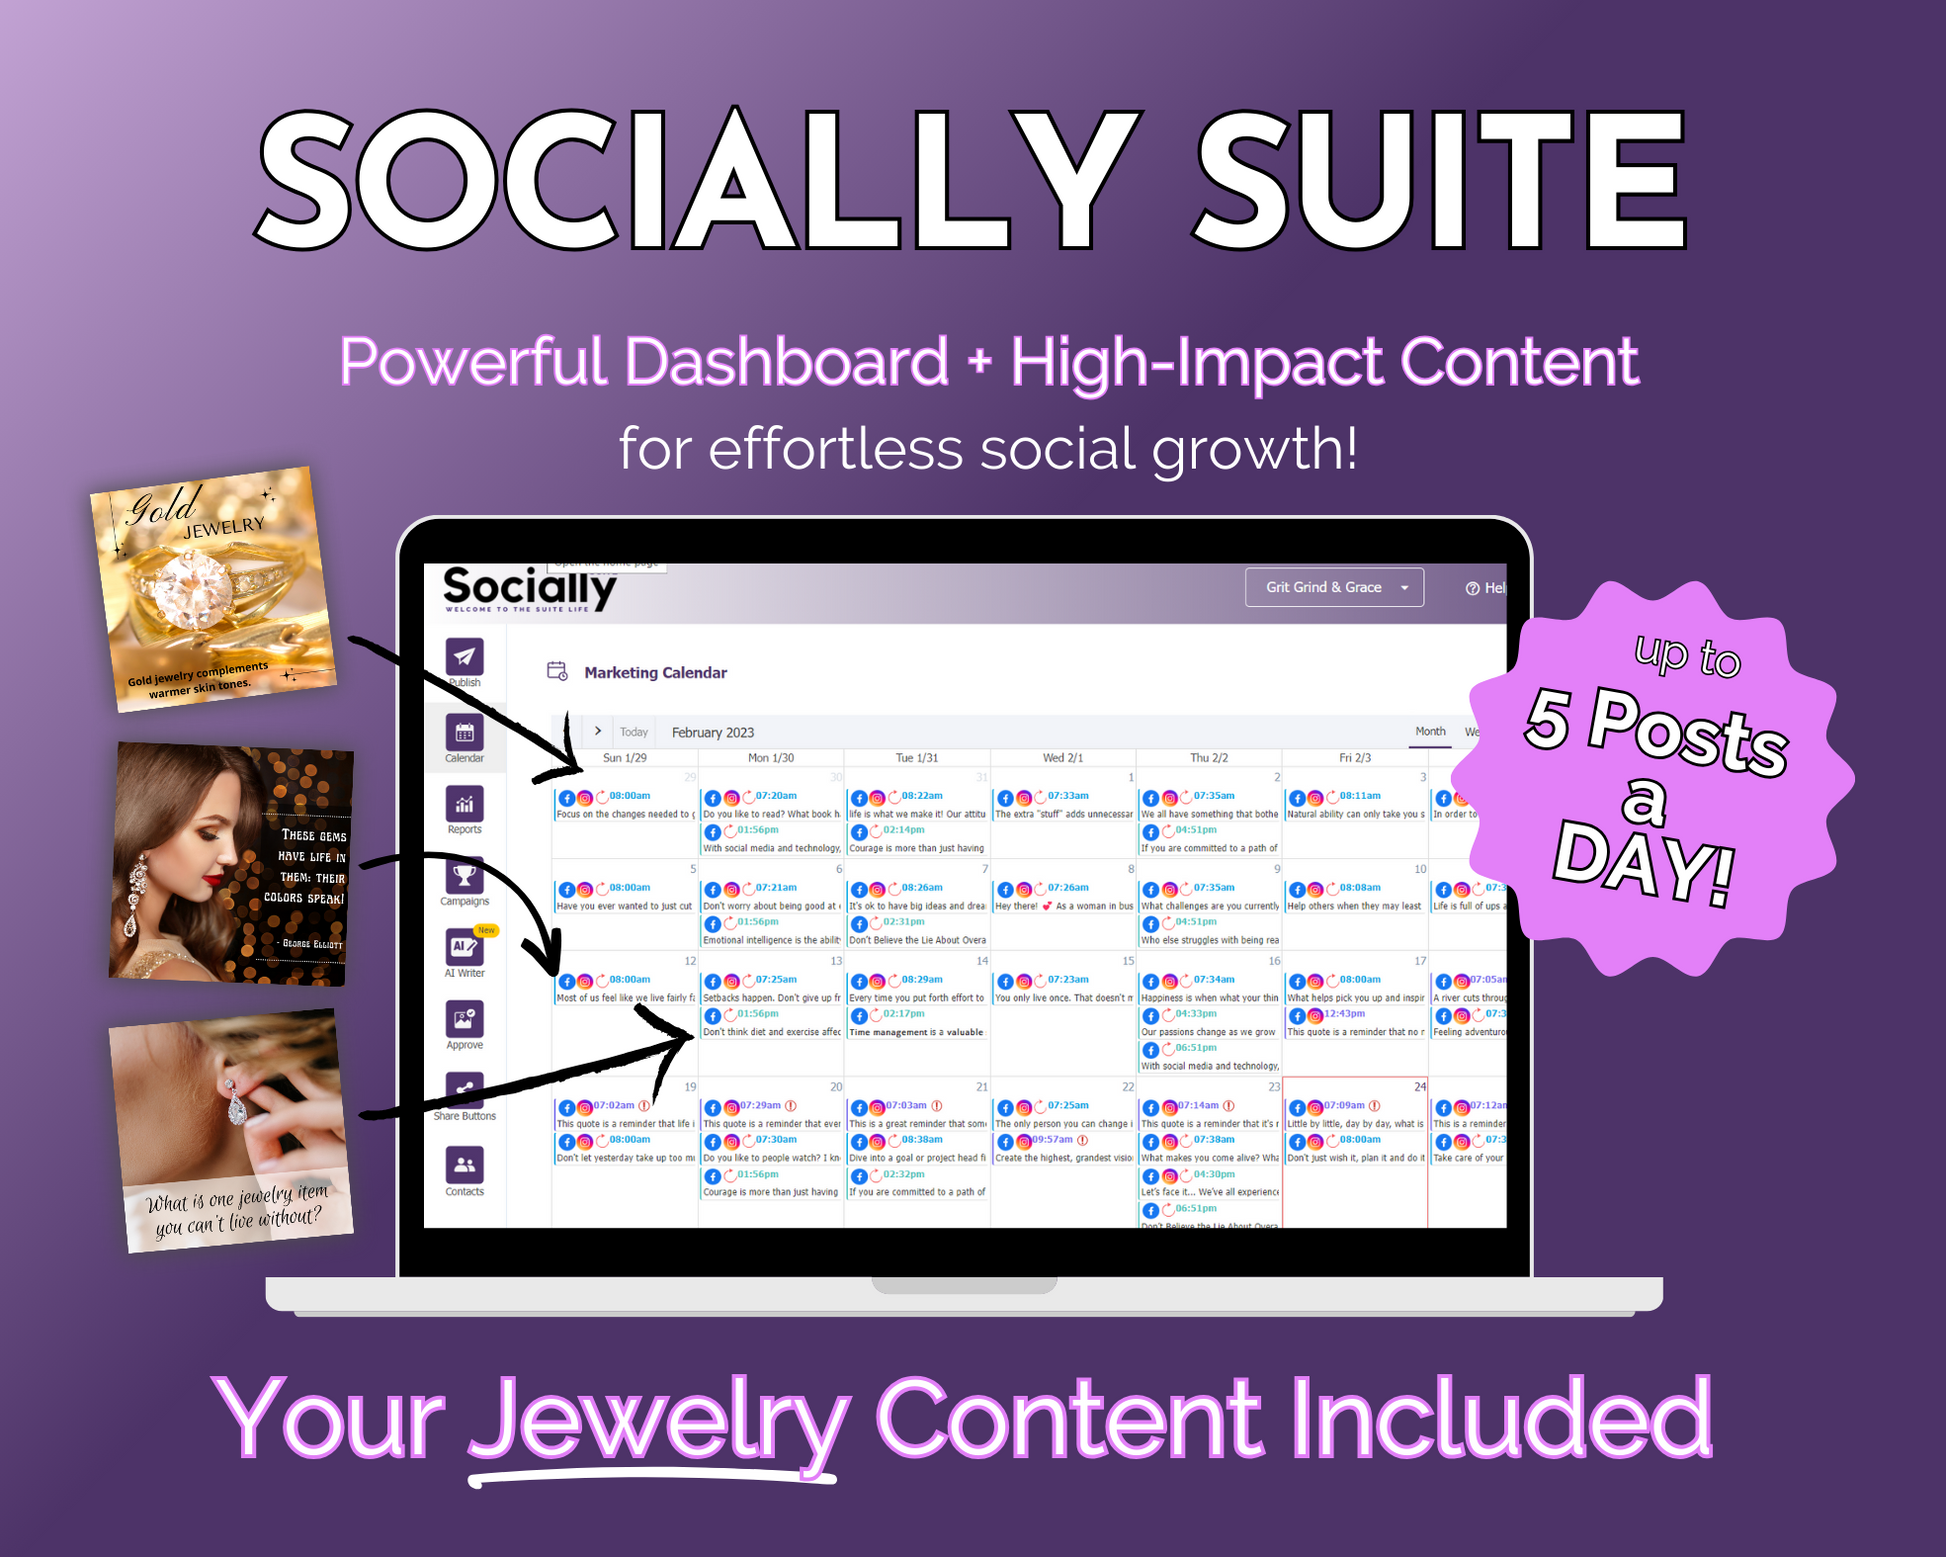 Get Socially Inclined's Socially Suite Membership is a powerful content management tool with a high-powered dashboard. This virtual world platform allows you to easily manage and create engaging social media marketing content, including jewelry.